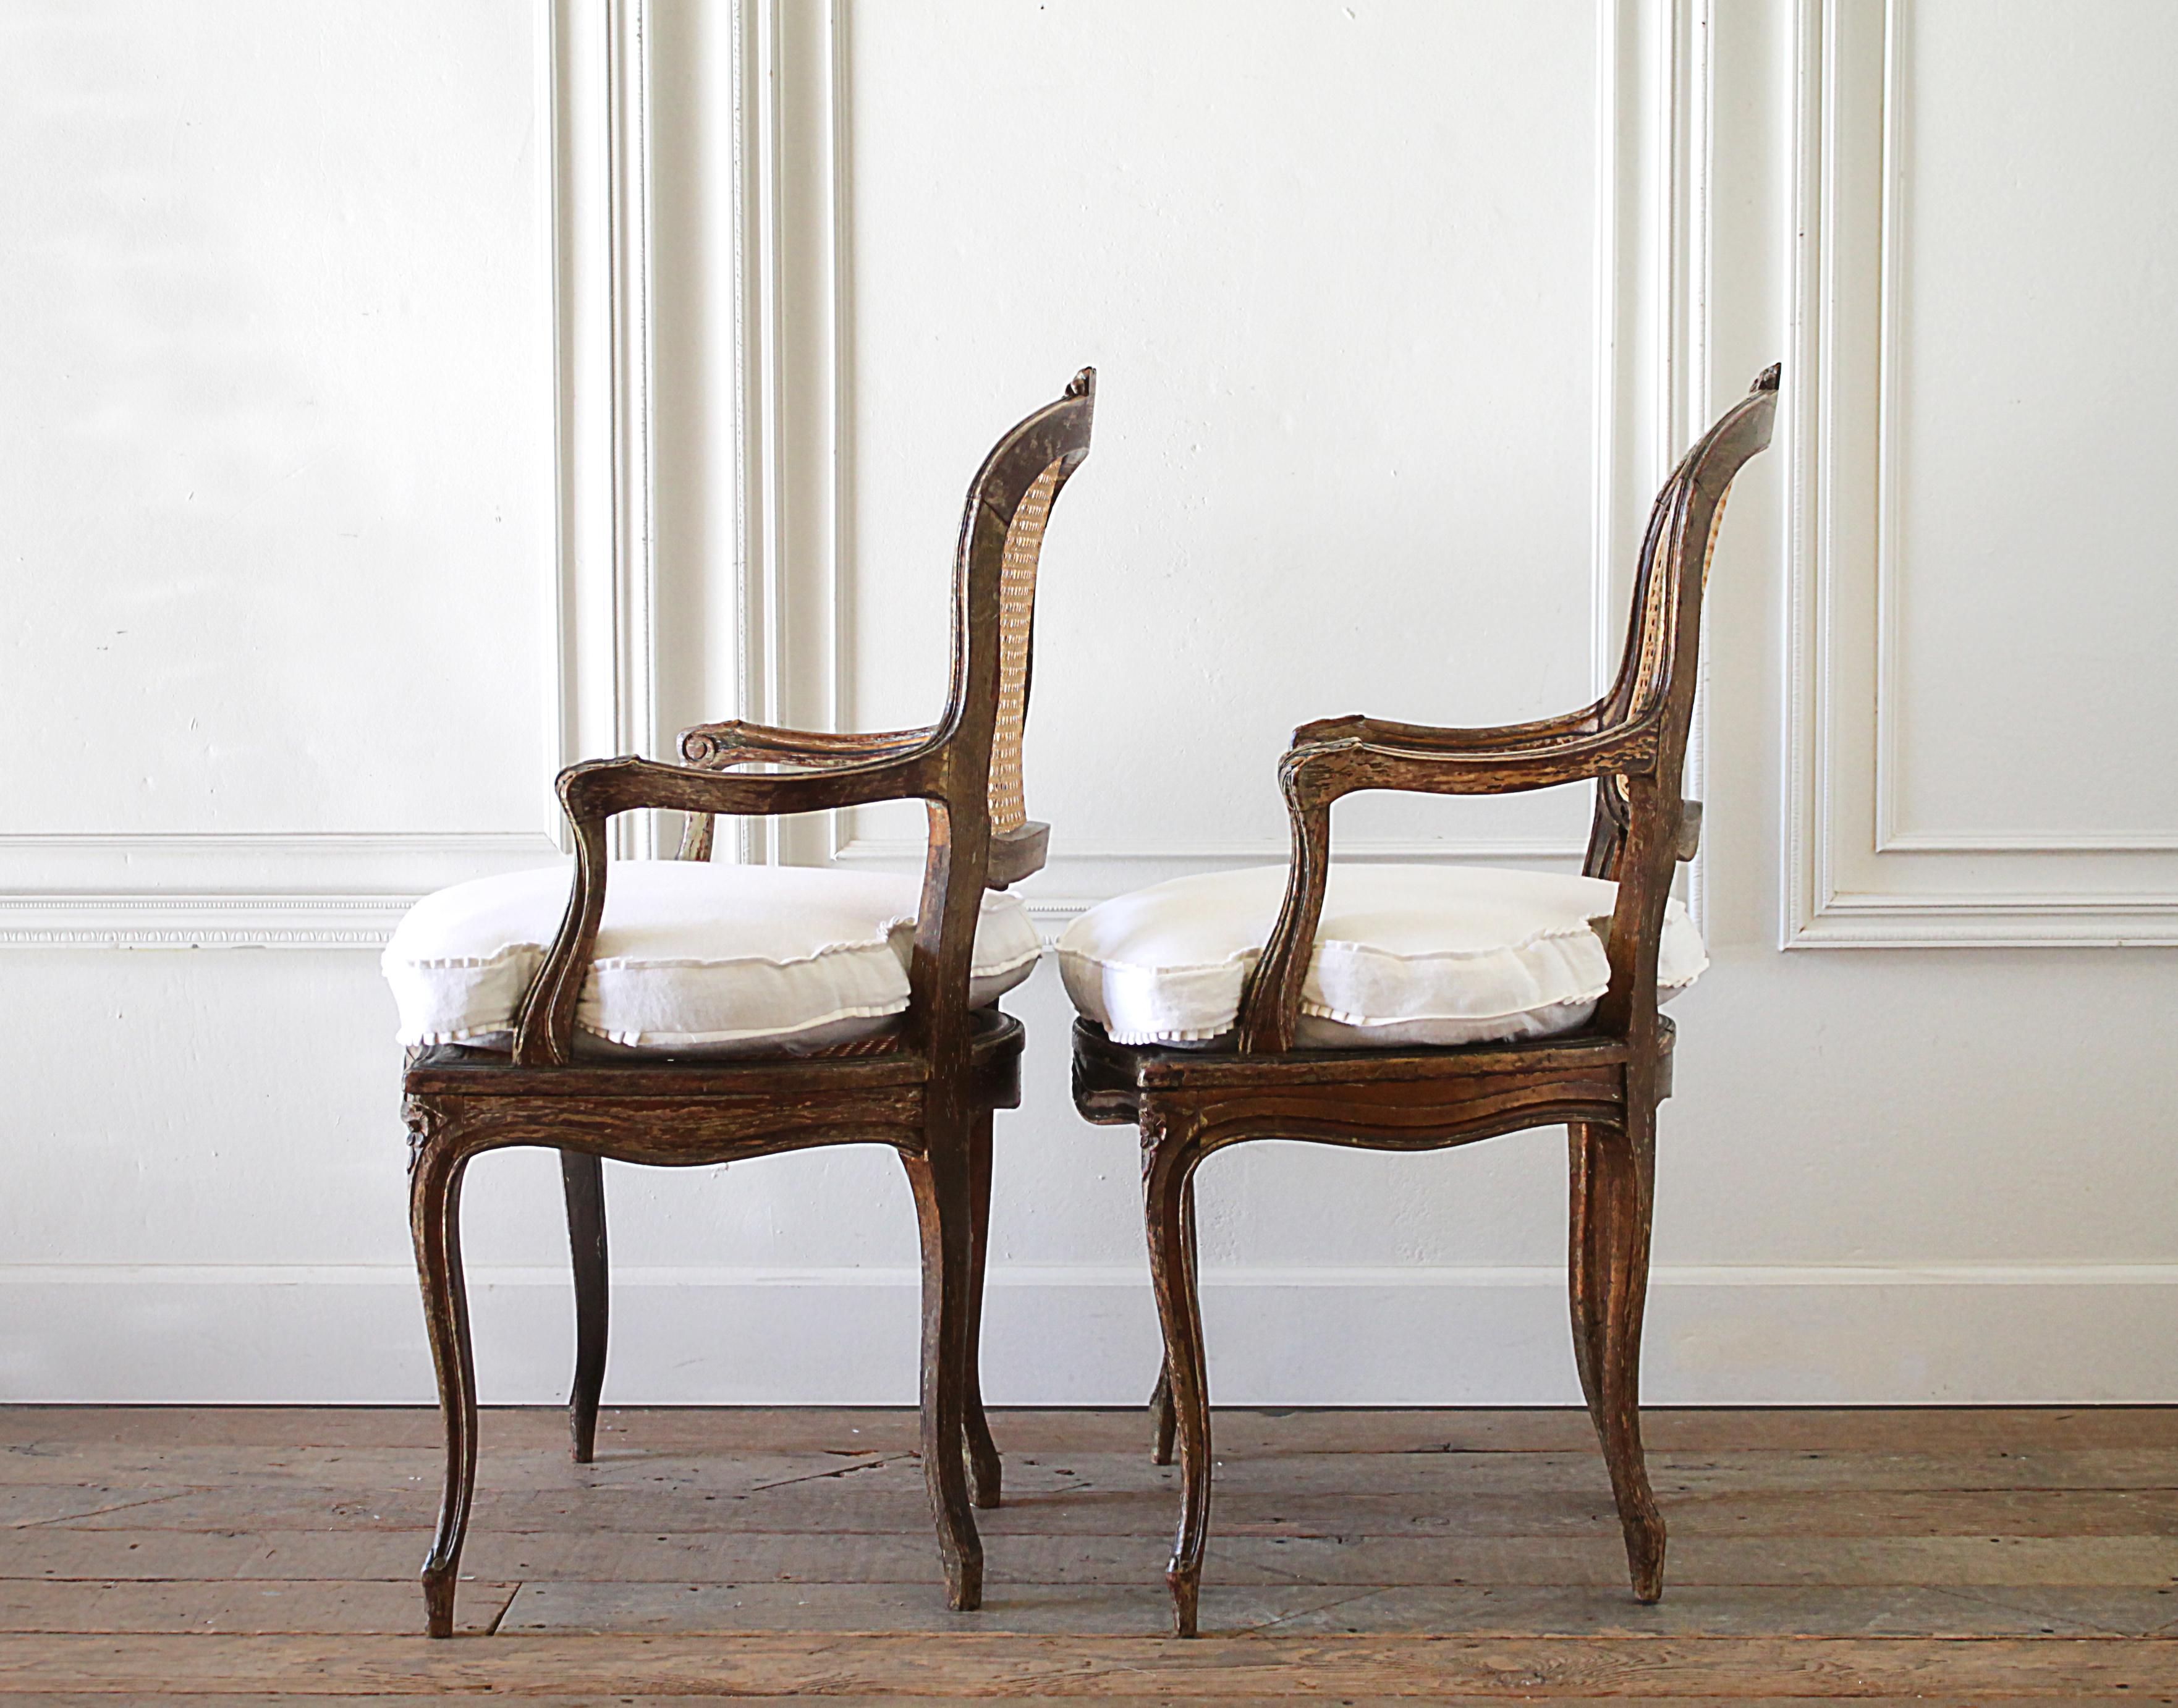 antique wooden chairs with cushions